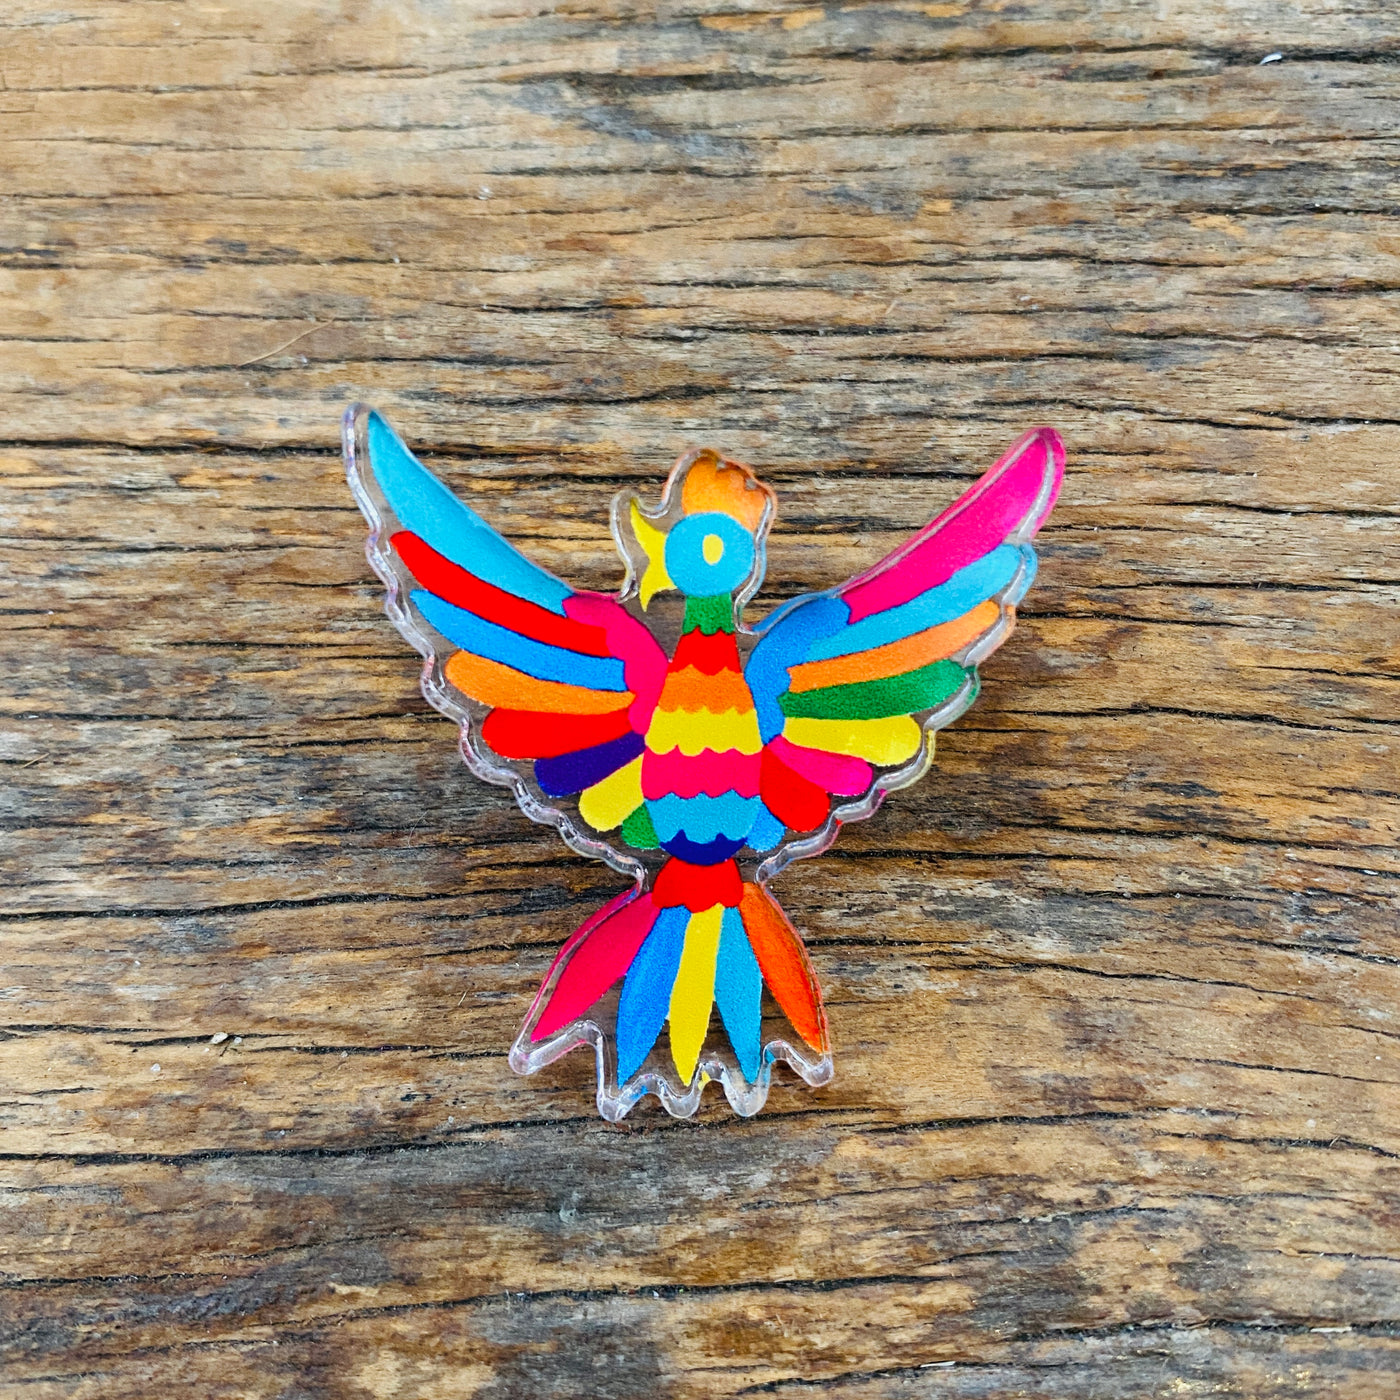 Clear enamel pin with a colorful Otomi bird on it.